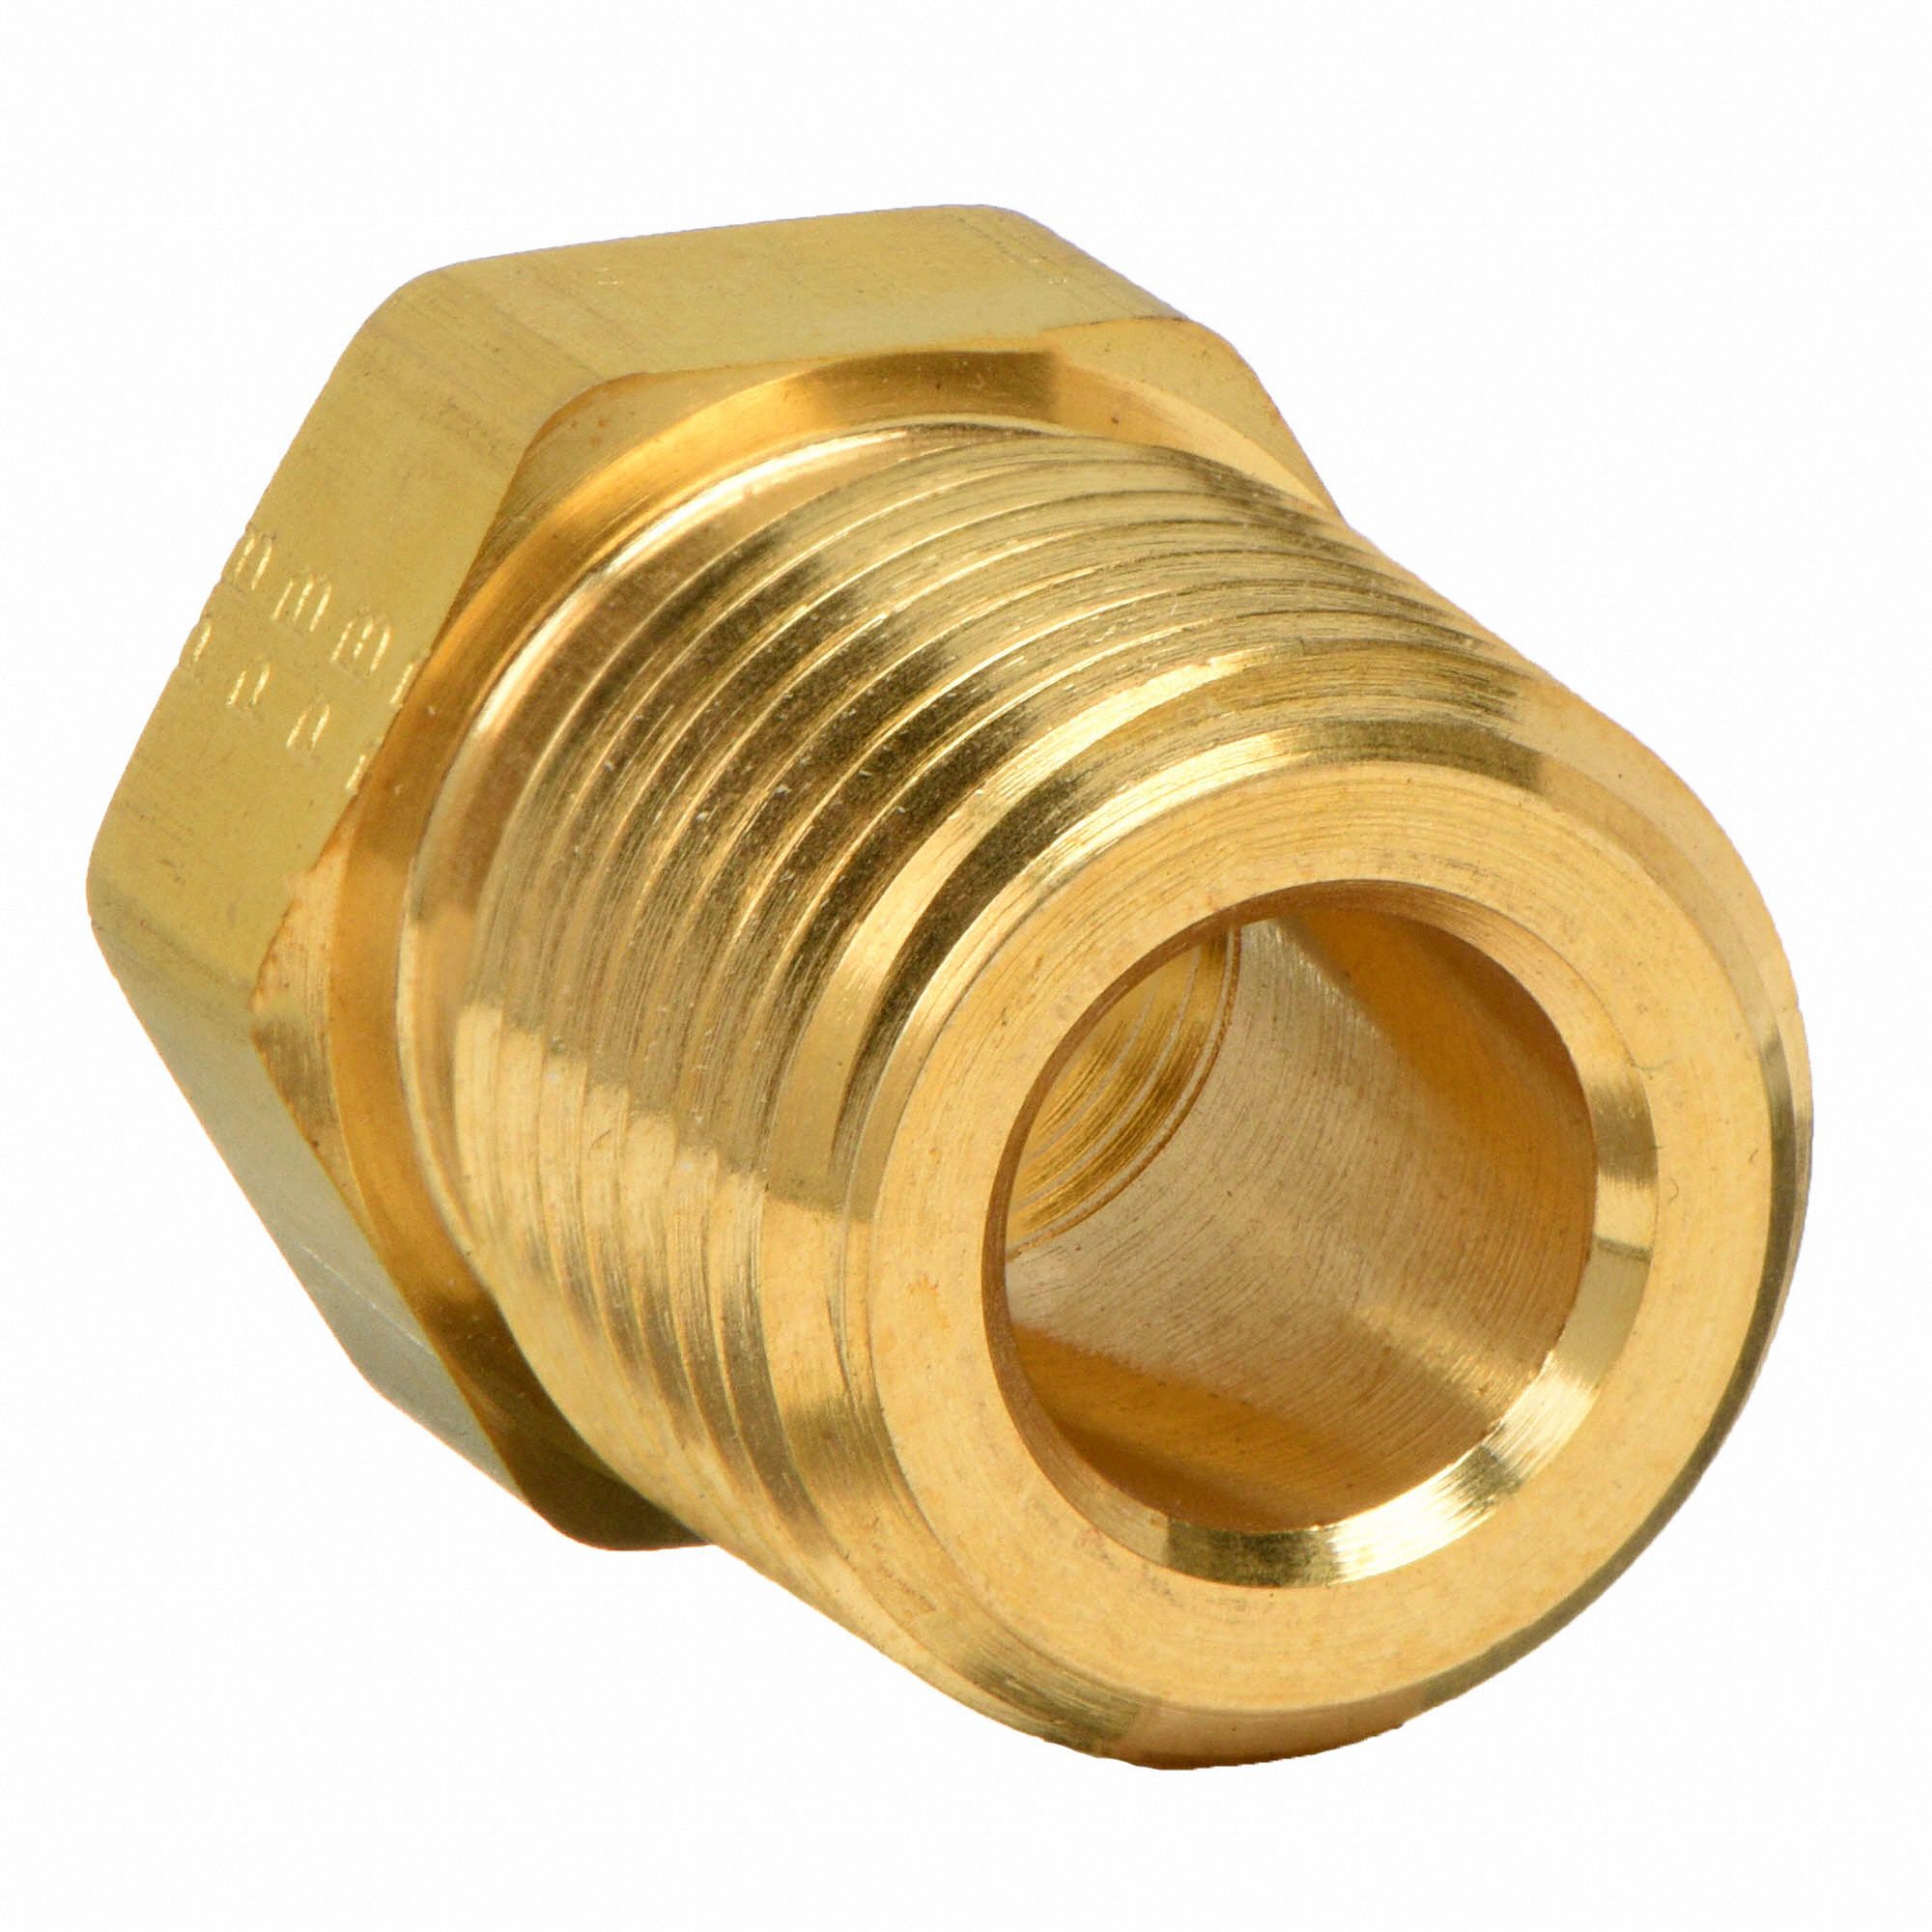 PARKER Reducing Bushing: Brass, 3/4 in x 1/2 in Fitting Pipe Size, Male